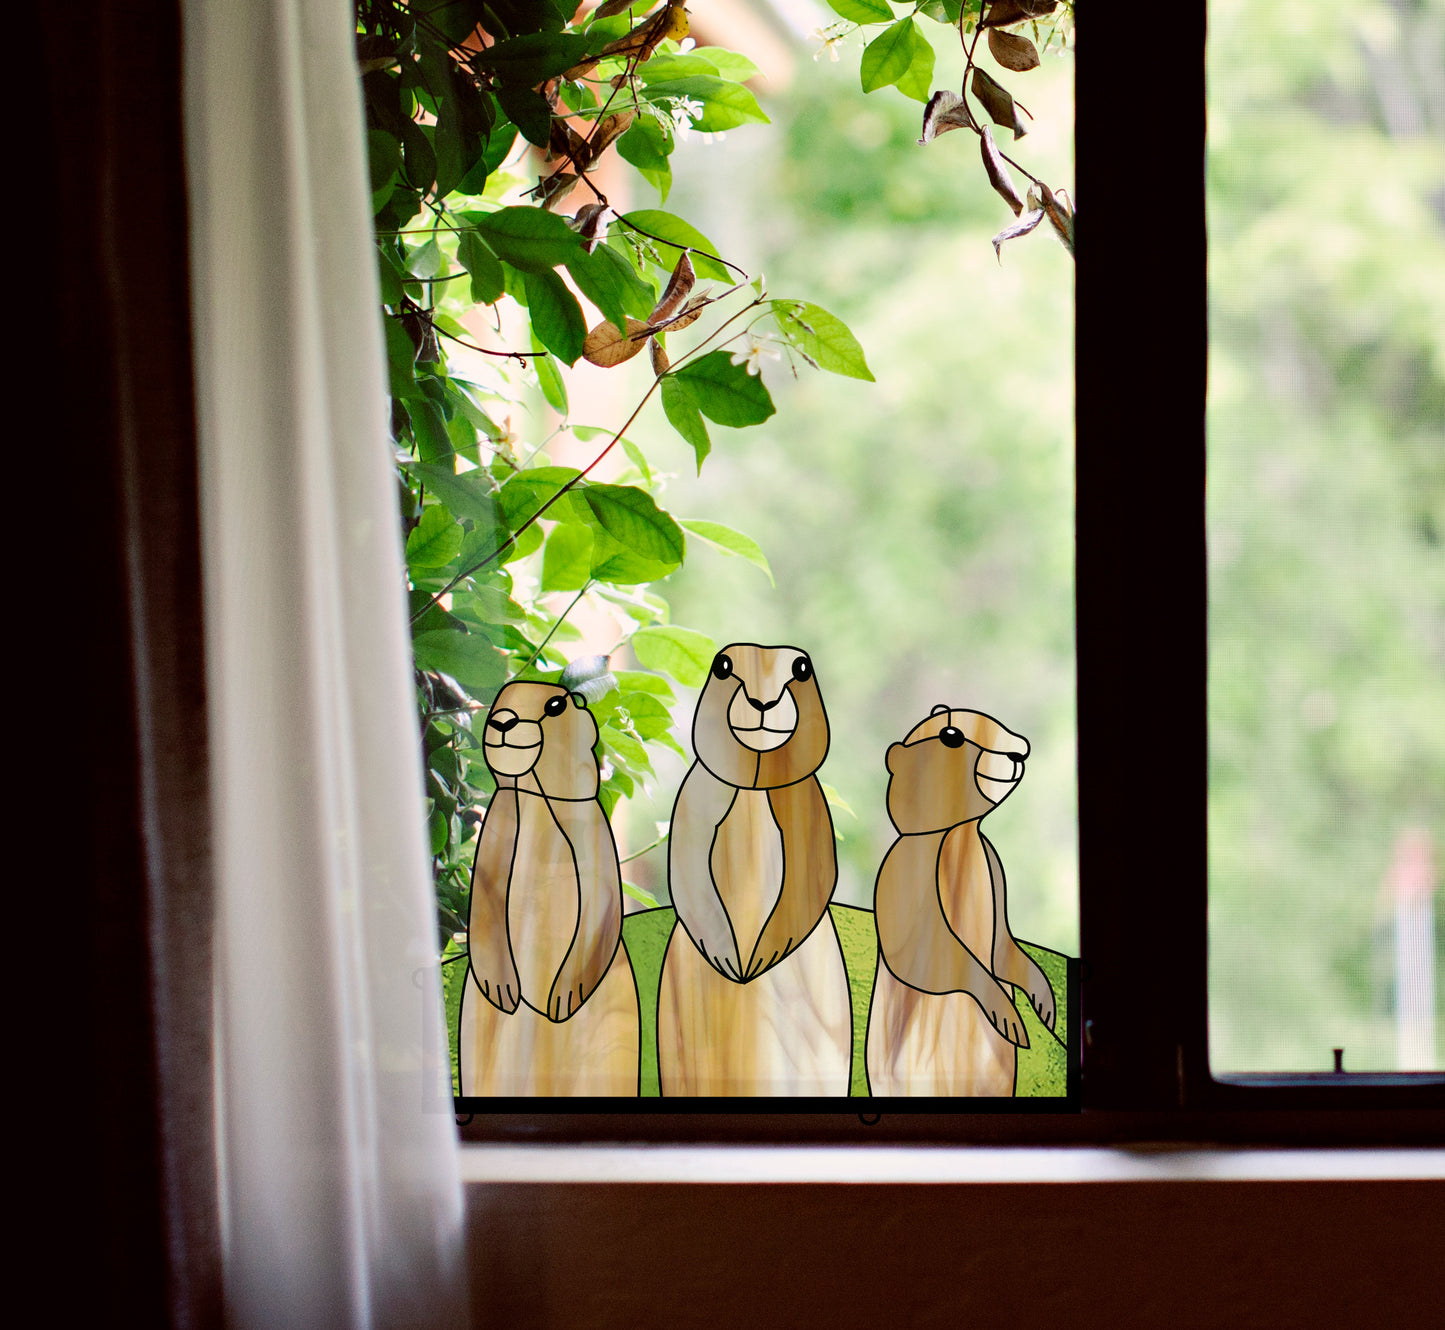 prairie dog stained glass pattern, instant pdf, shown in window with ivy